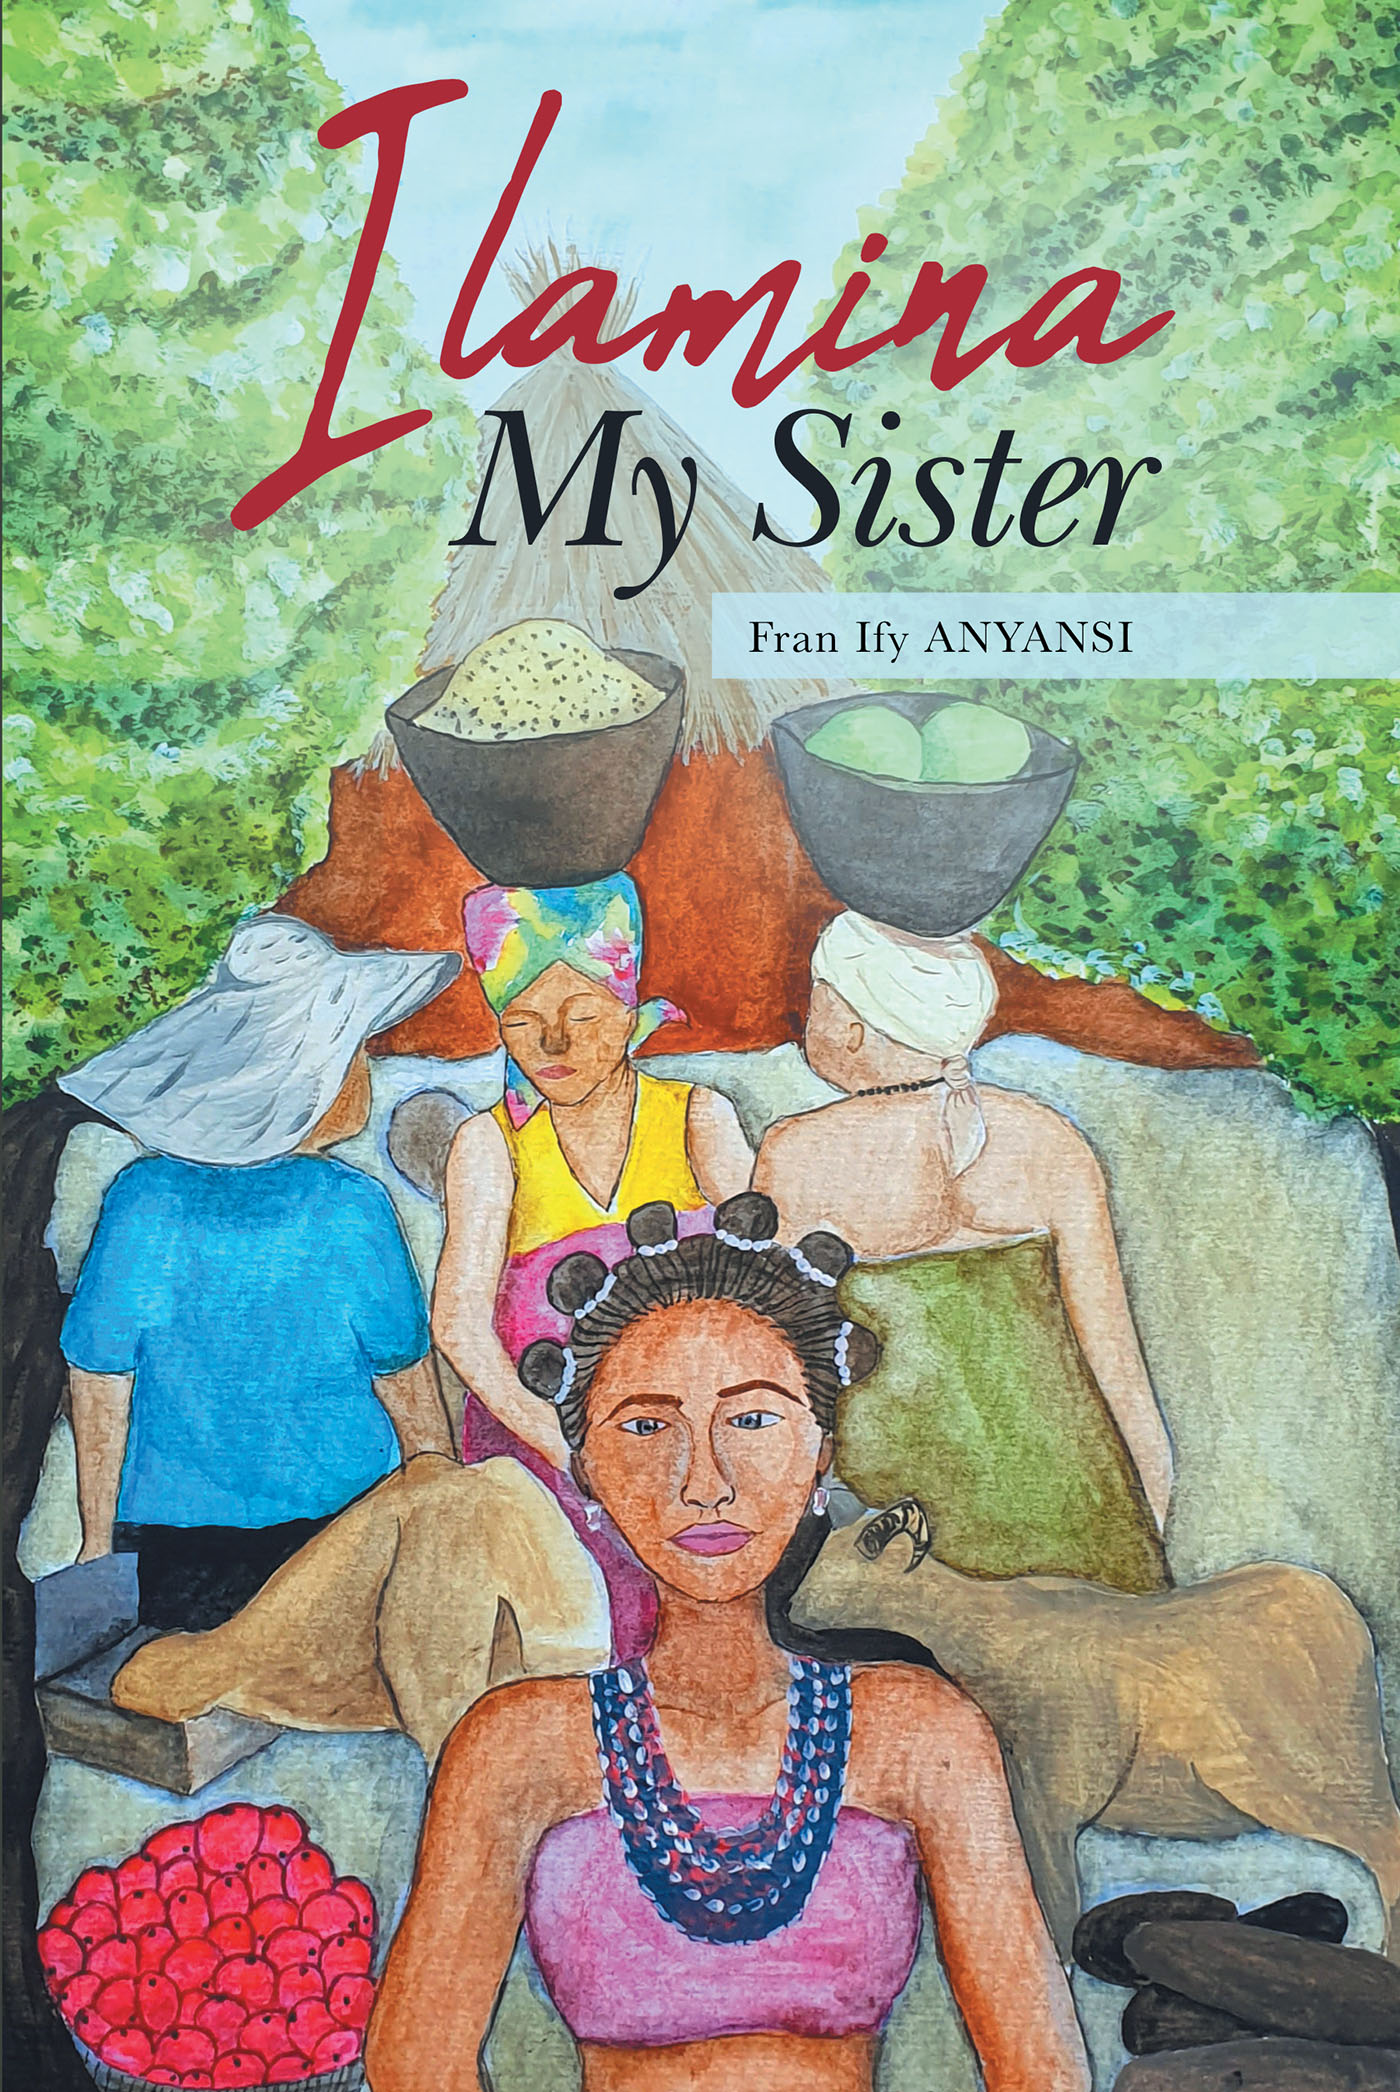 Author Fran Ify Anyansi’s New Book, "Ilamina, My Sister," is a Compelling Story of the Struggles of Those Faced with Government Corruption & Injustice in the Niger Delta